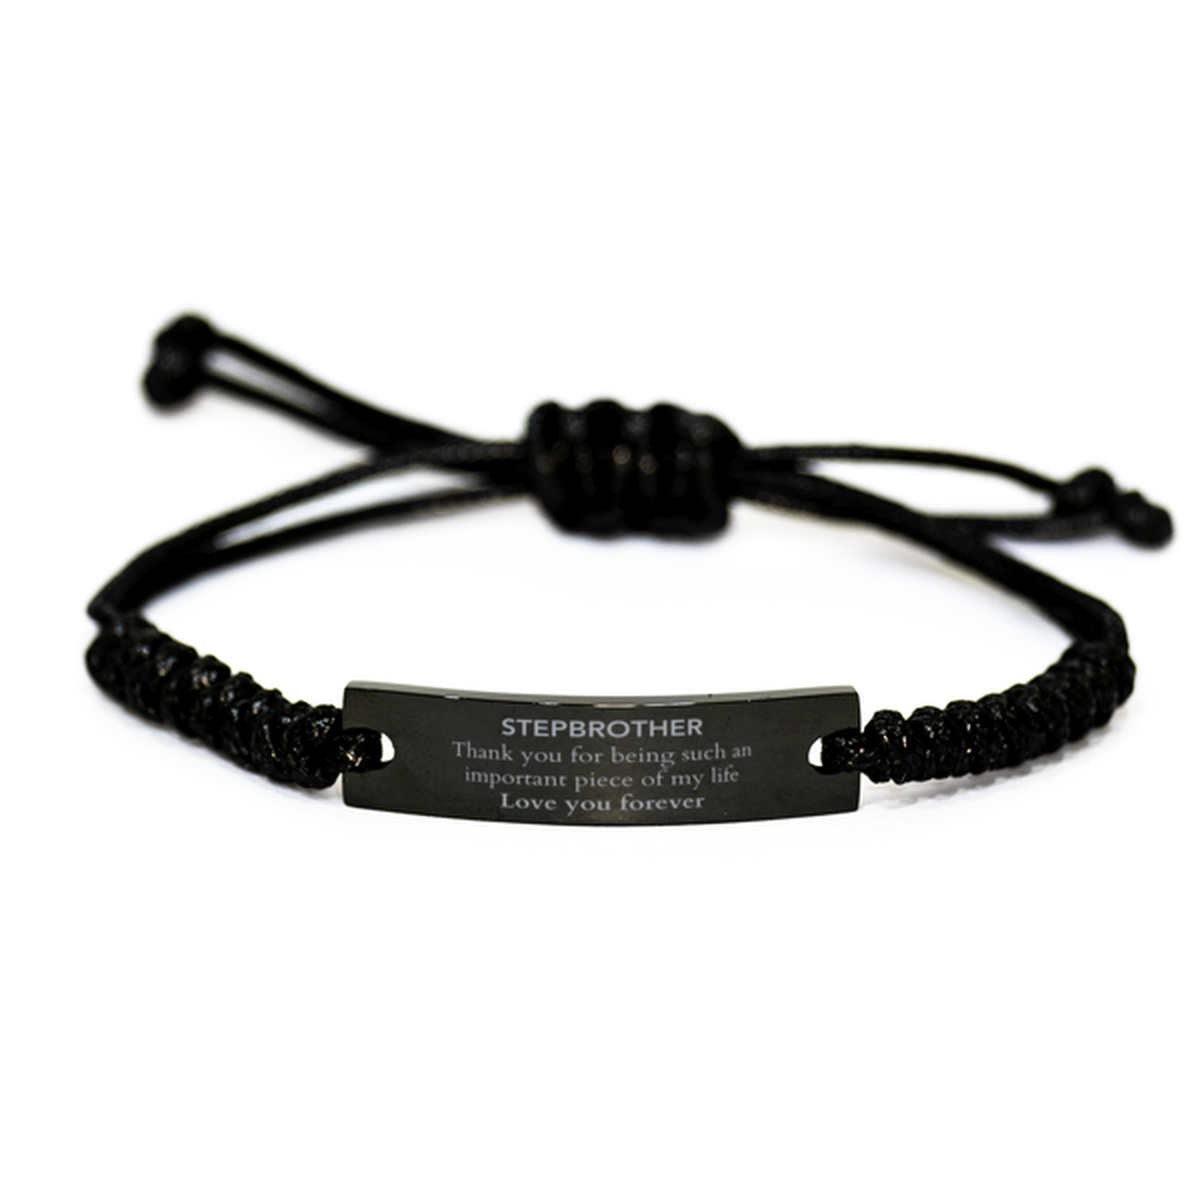 Appropriate Stepbrother Black Rope Bracelet Epic Birthday Gifts for Stepbrother Thank you for being such an important piece of my life Stepbrother Christmas Mothers Fathers Day